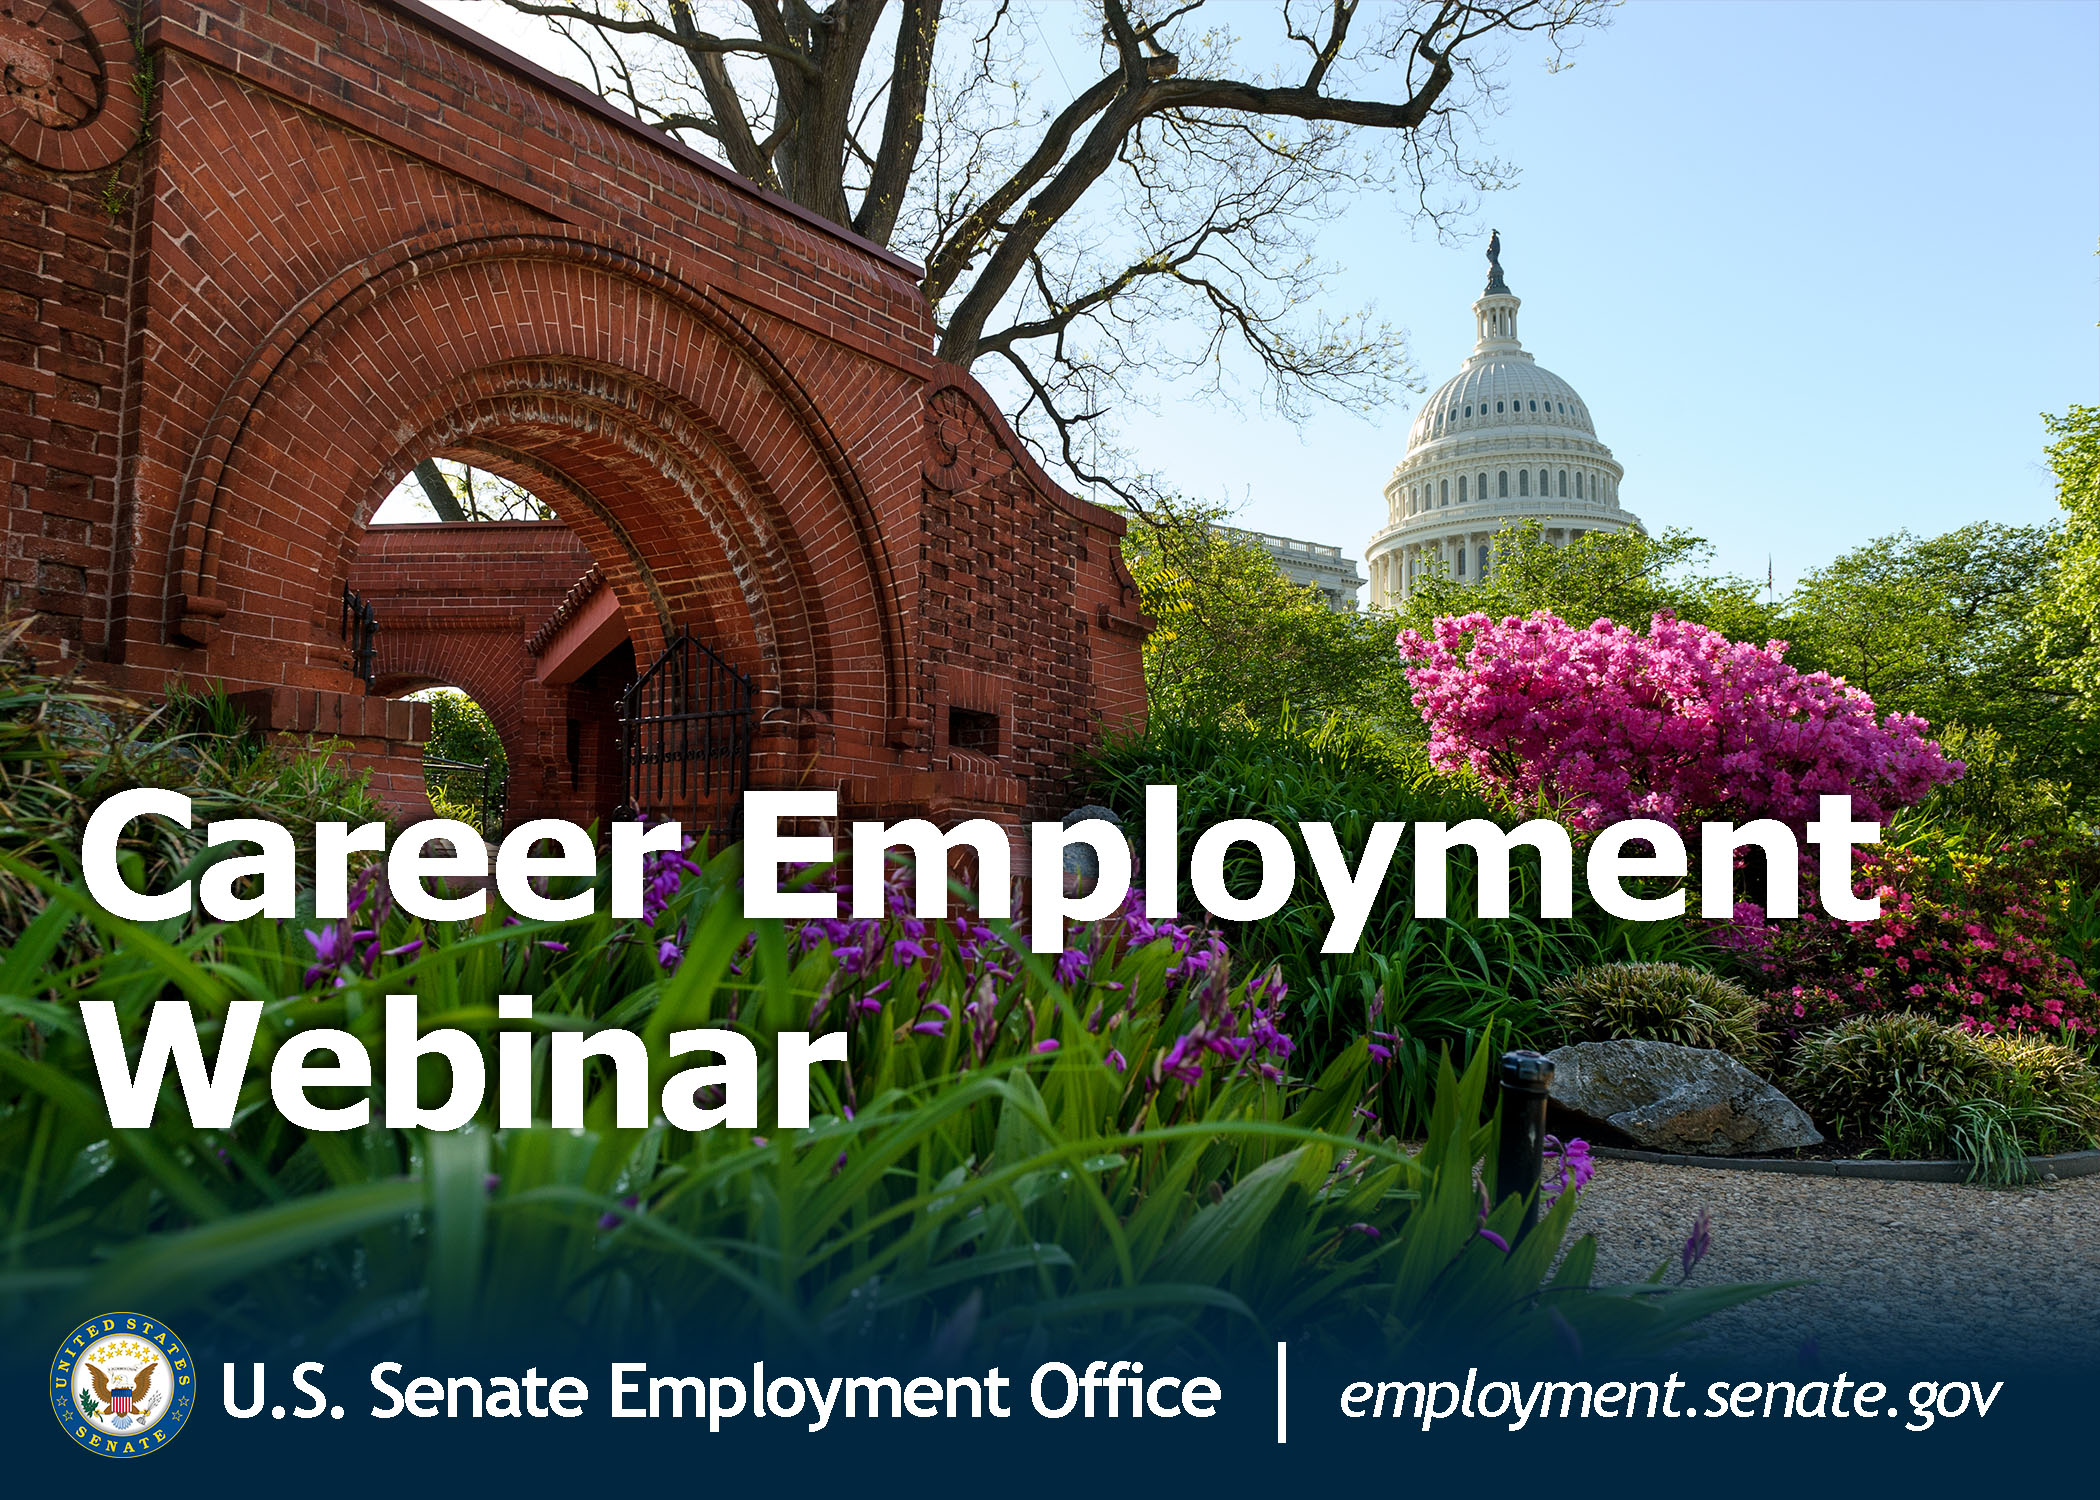 A garden in front of the US Capitol with the words "Career Employment Webinar" in front.